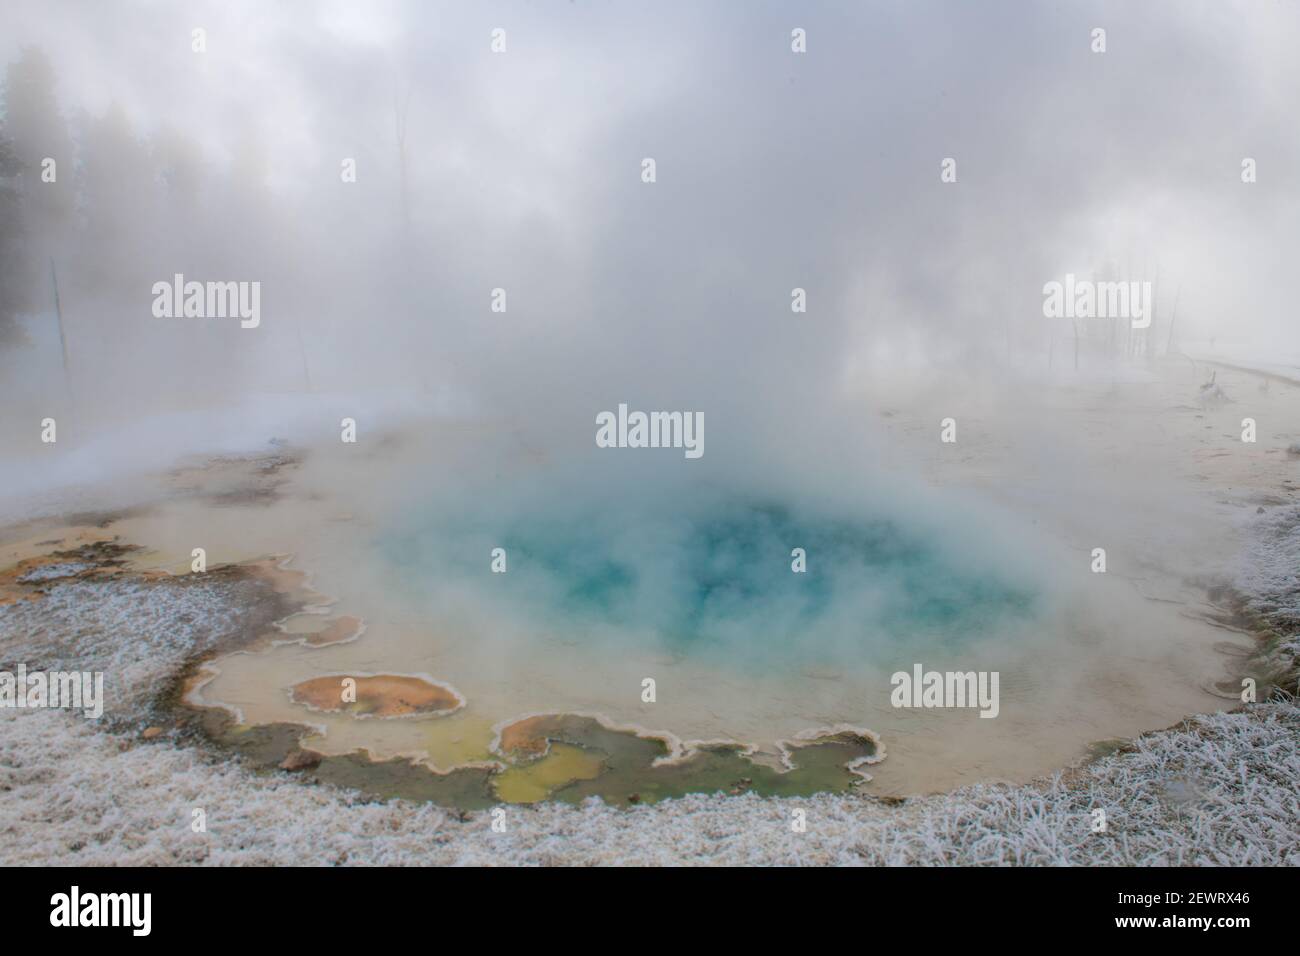 Blue thermal feature in the fog and snow, Yellowstone National Park, UNESCO World Heritage Site, Wyoming, United States of America, North America Stock Photo